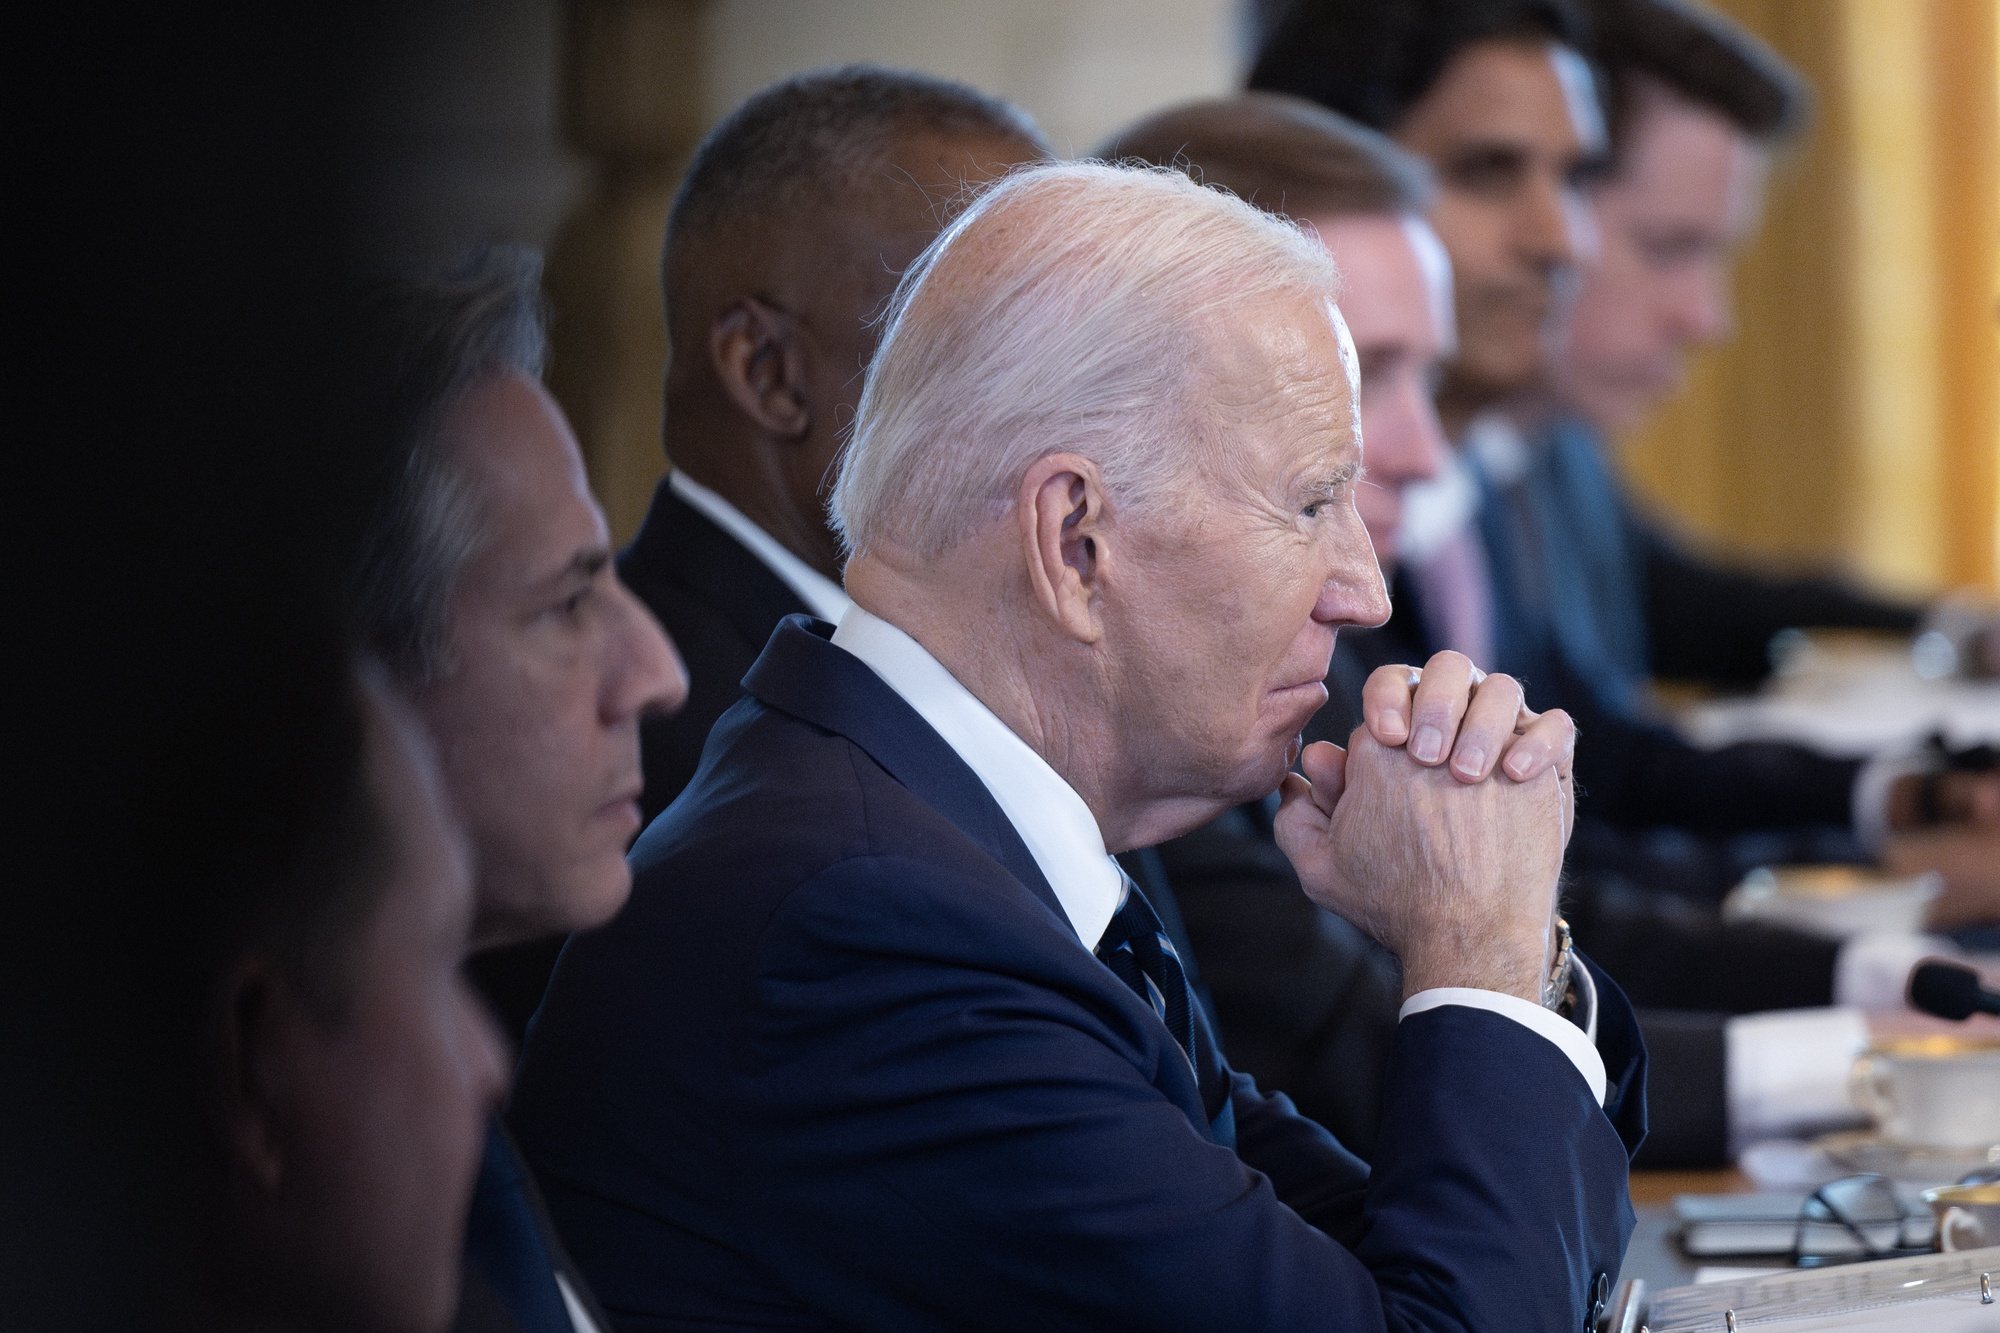 epa11217200 US President Joe Biden (L) listens in during a meeting with Poland&#039;s President Andrzej Duda (not pictured), in the East Room of the White House in Washington, DC, USA, 12 March 2024. US President Biden on 11 March said there was no need for additional US troops to bolster Poland’s border ahead of a request from that country’s head of state for more personnel and military equipment to ease worries over Russian aggression on NATO’s eastern flank.  EPA/TOM BRENNER / POOL